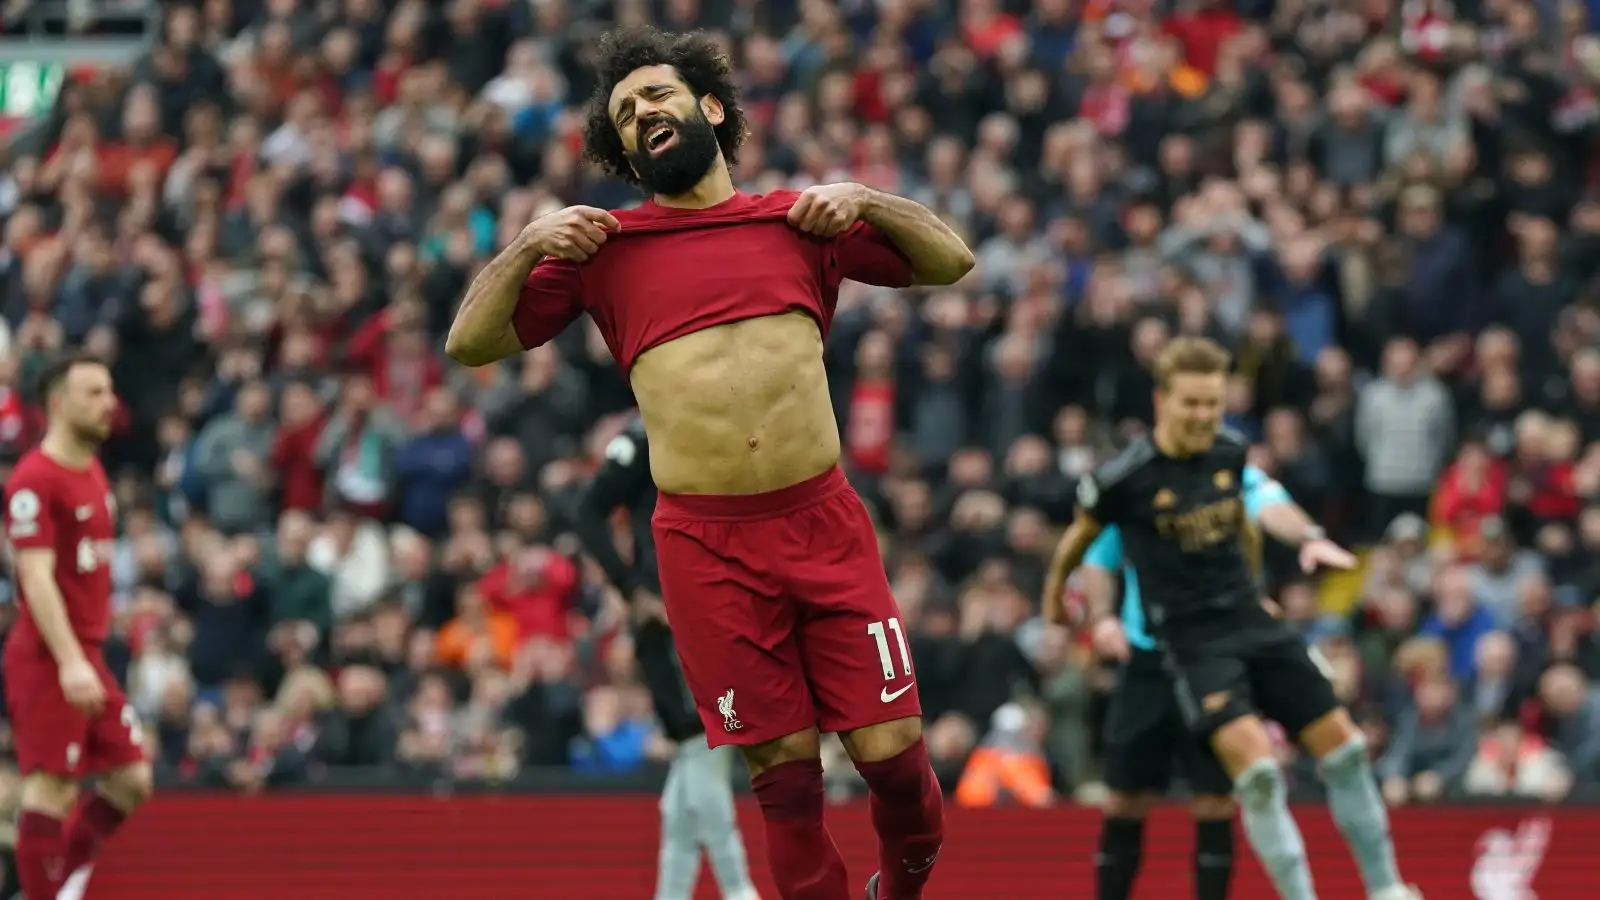 Liverpool forward Mo Salah looks dejected after missing a penalty